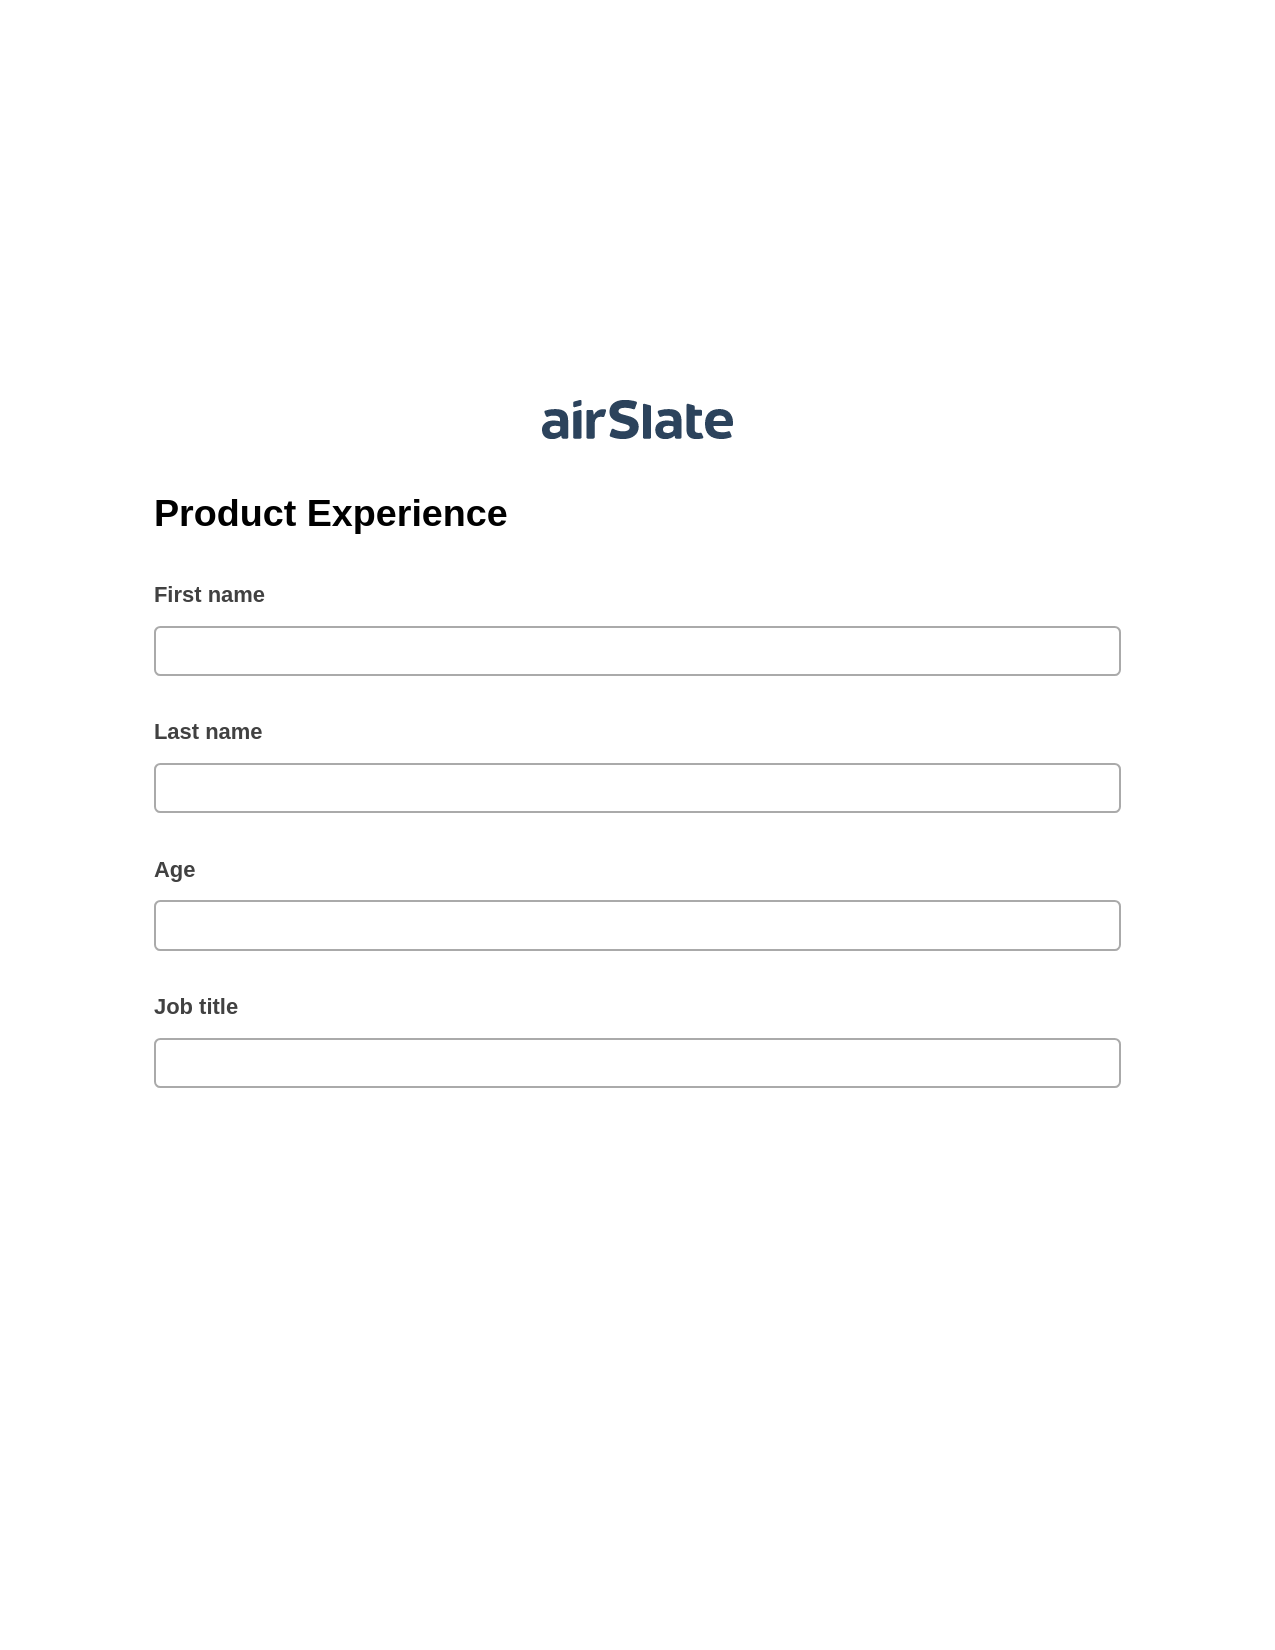 Product Experience Pre-fill from MS Dynamics 365 Records, Webhook Bot, Webhook Postfinish Bot